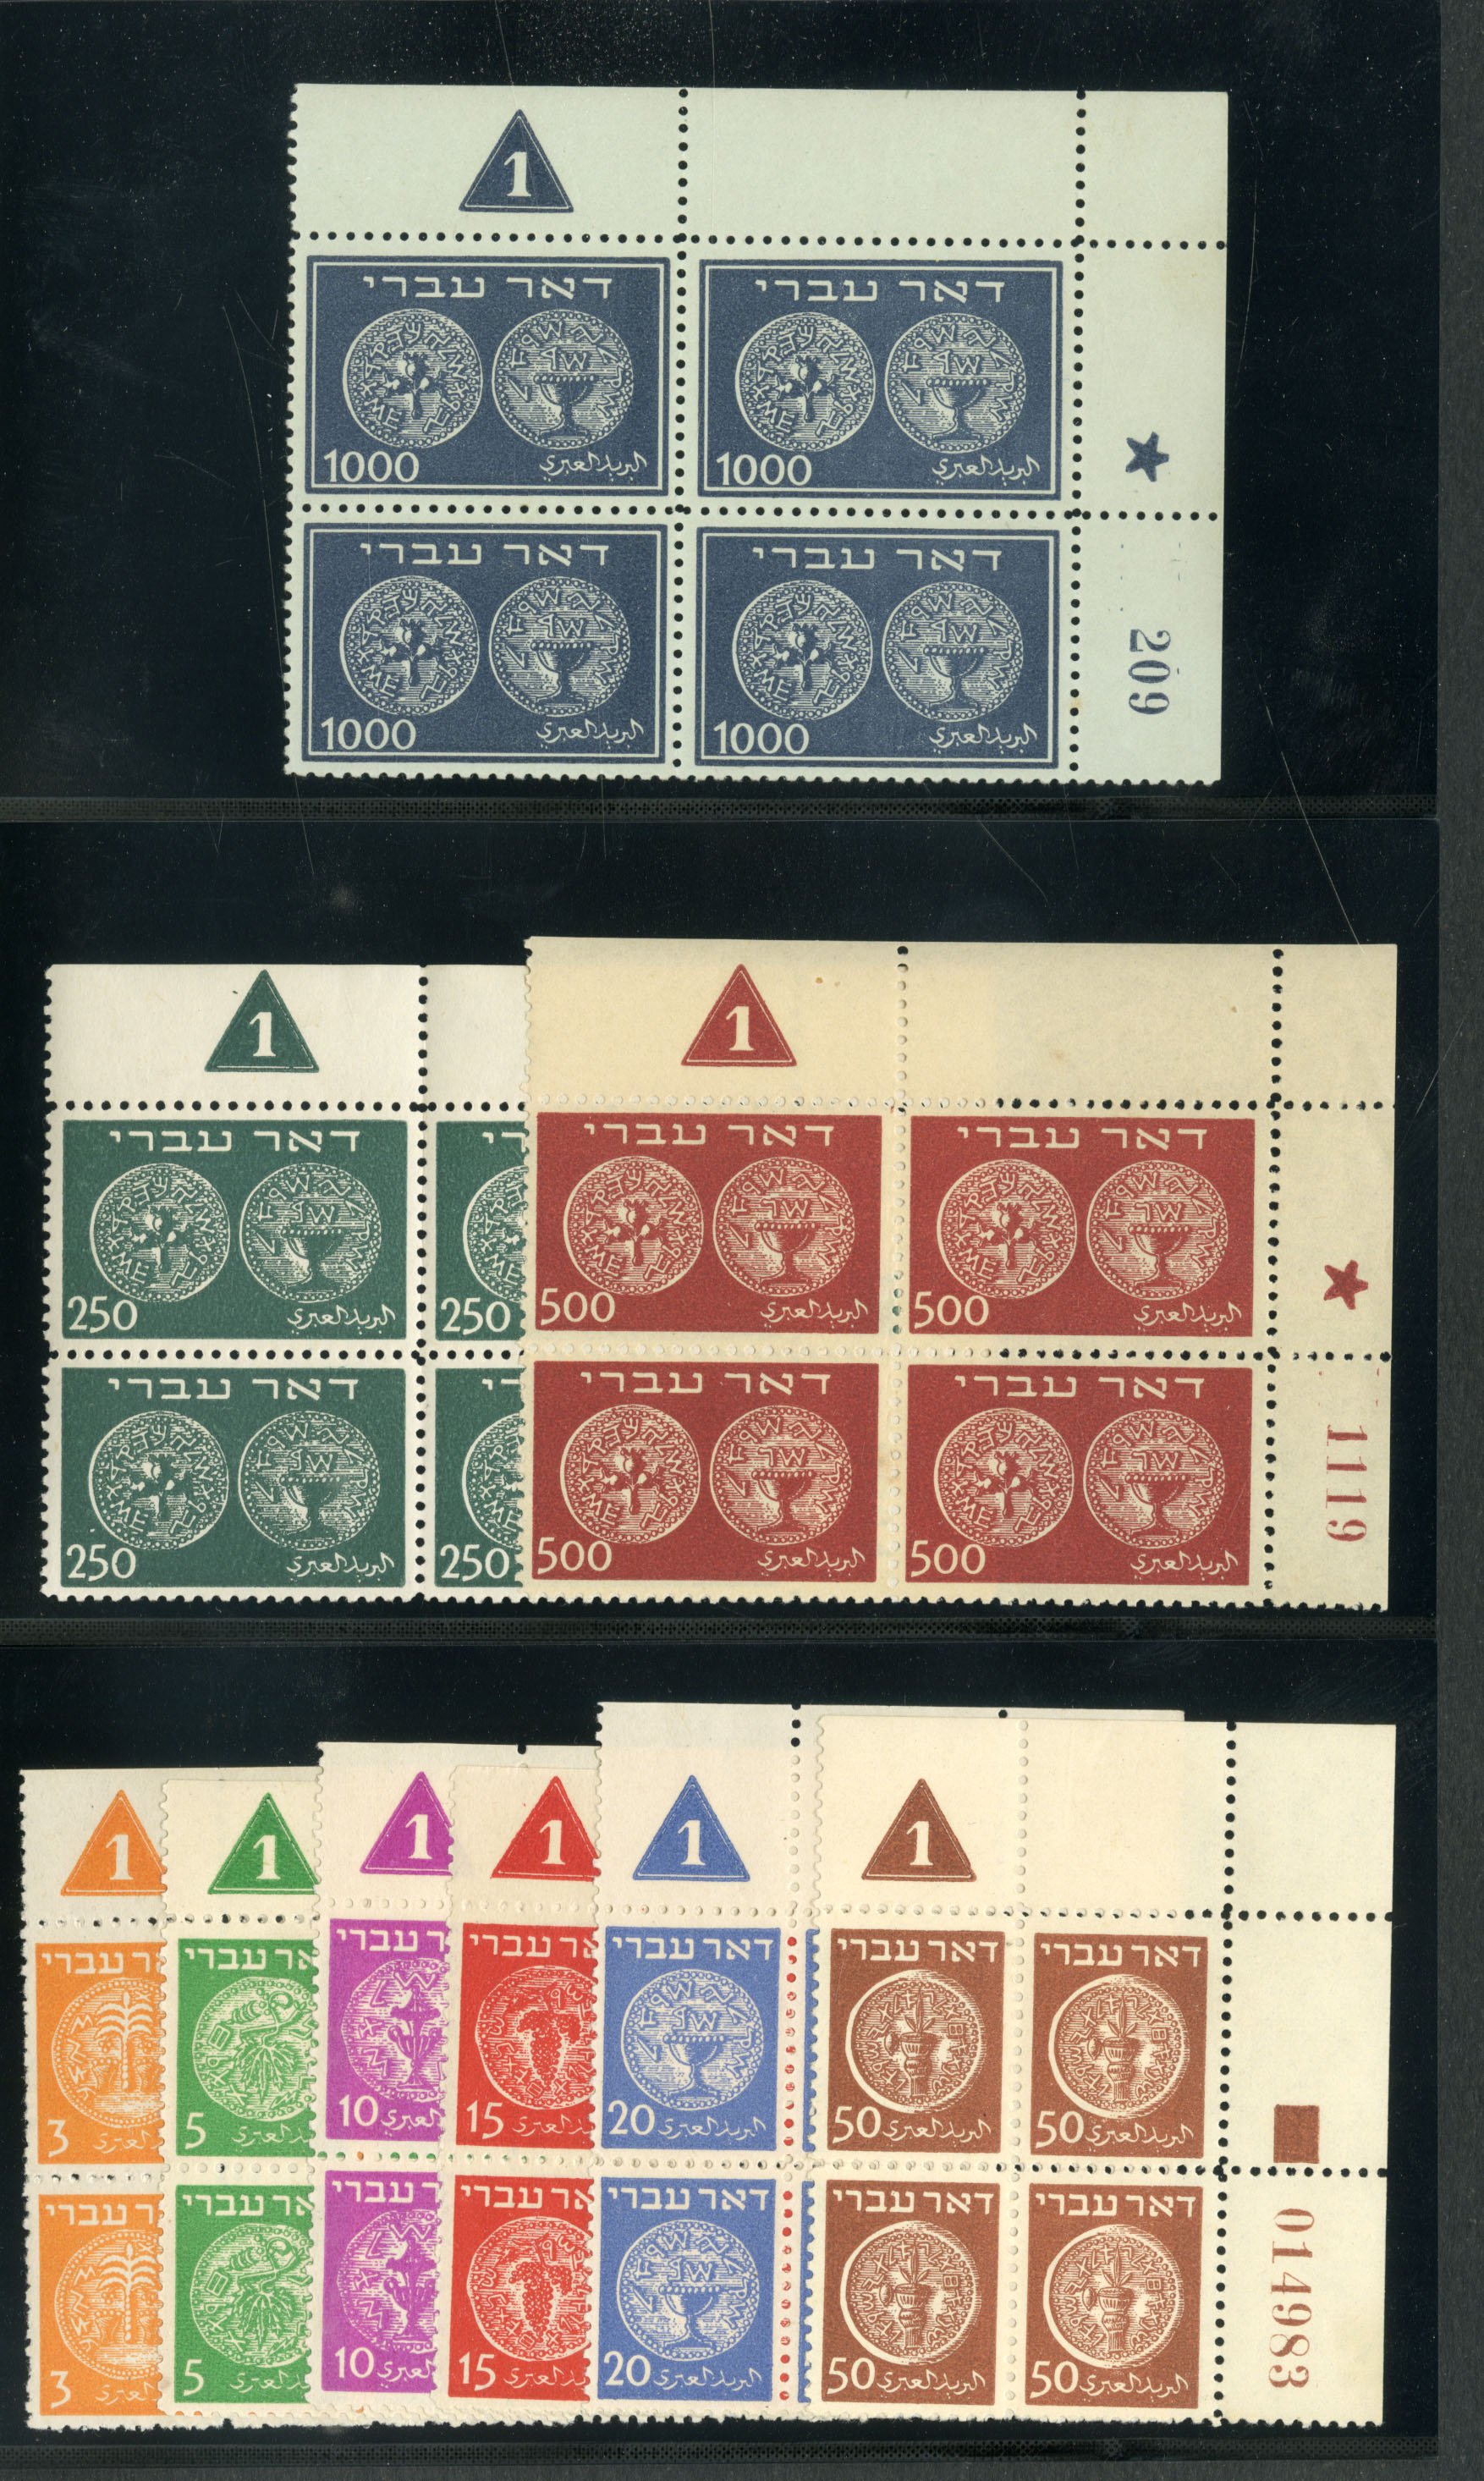 Lot 974 - MONTENEGRO Issued under Italian Occupation  -  Cherrystone Auctions U.S. & Worldwide Stamps & Postal History